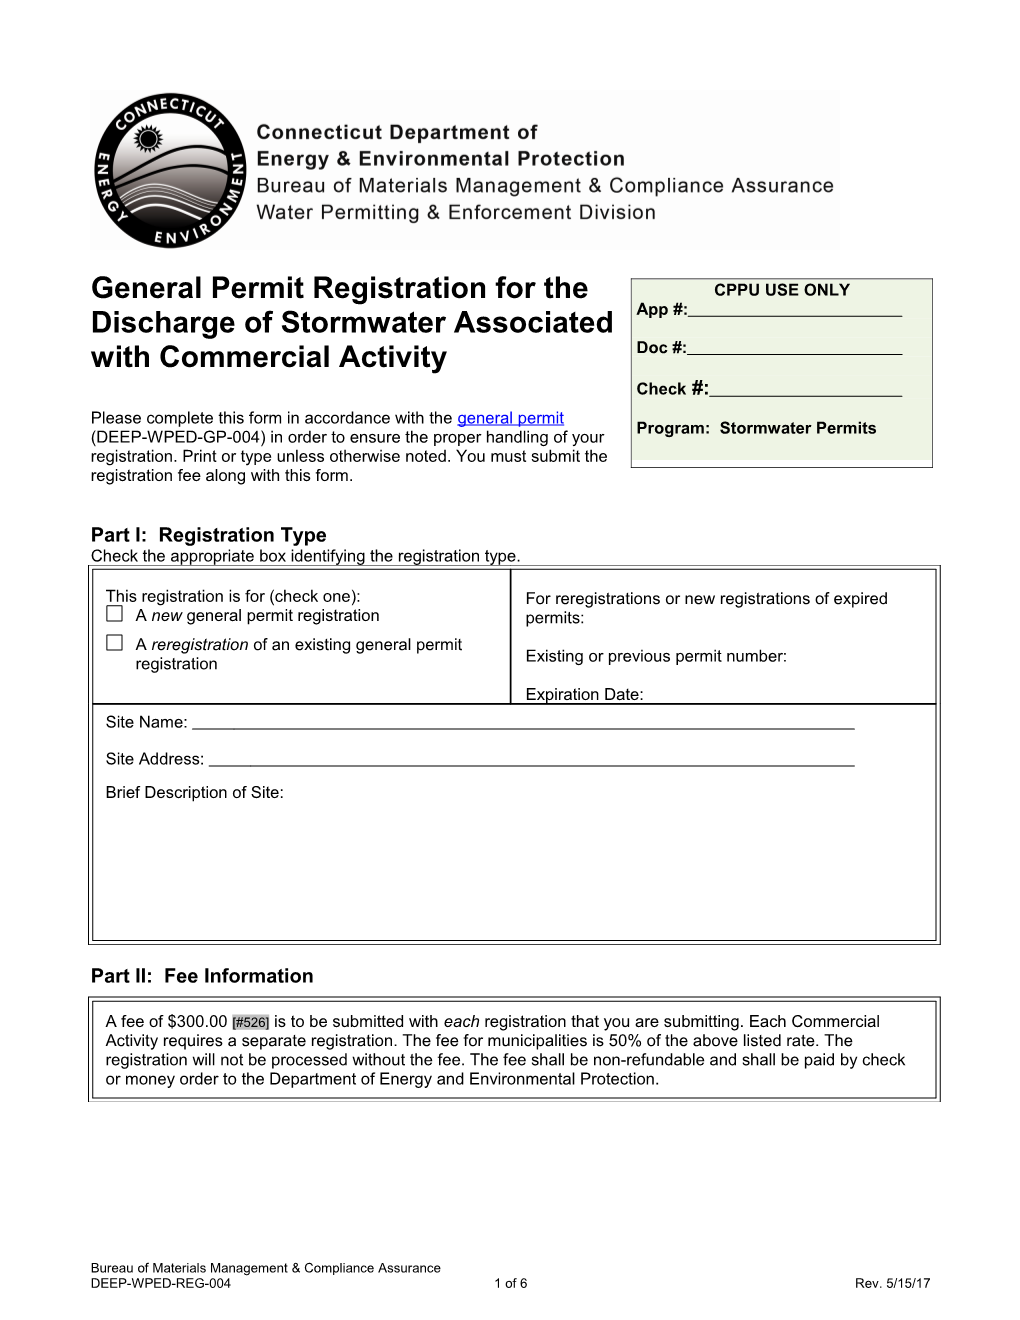 General Permit Registration Form for the Discharge of Stormwater Associated with Commercial